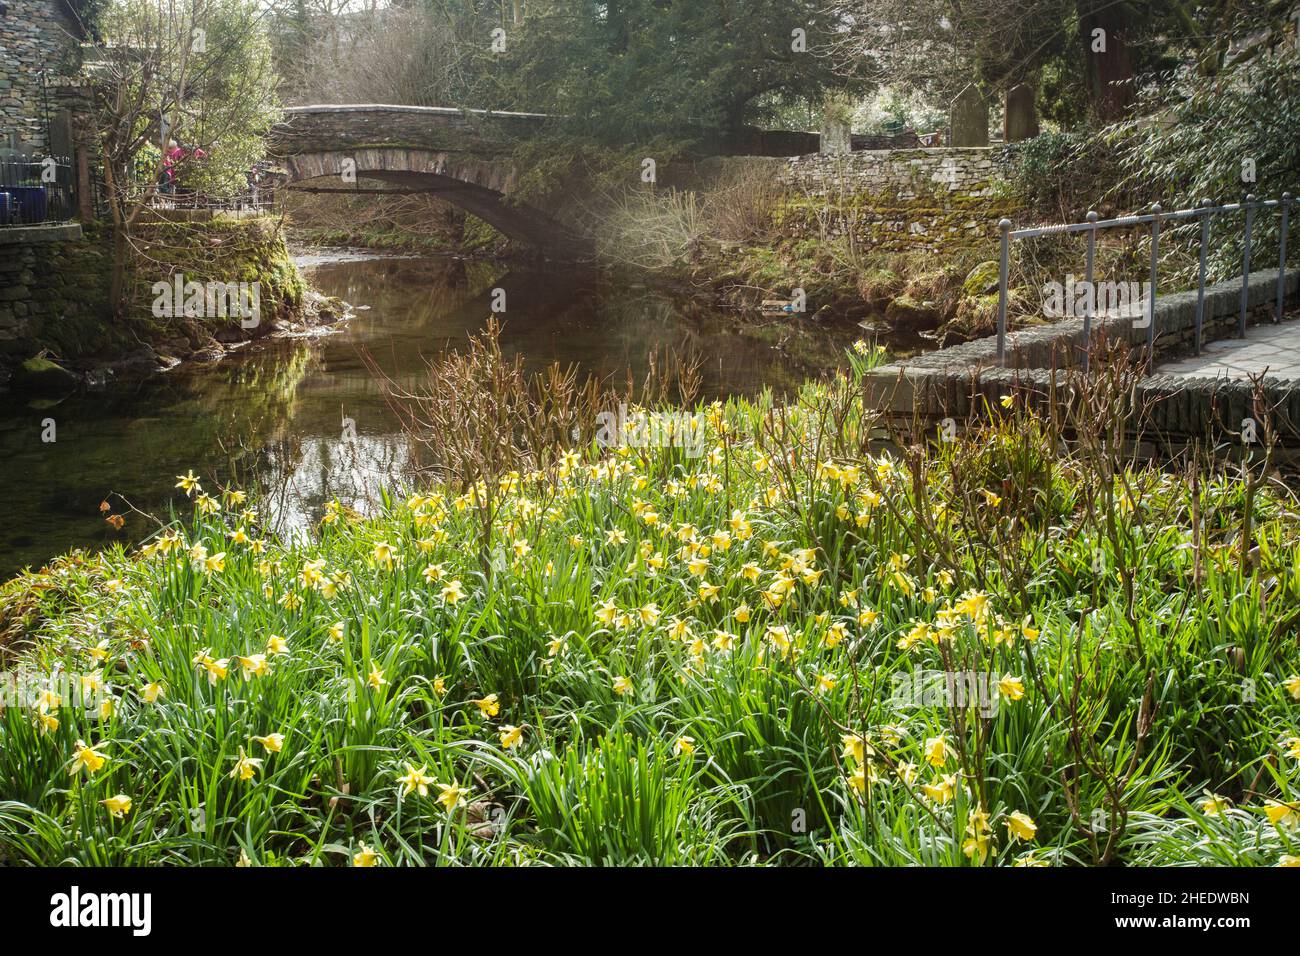 Grasmere Bridge & wild daffodils beside the River Rothay in the Wordsworth Memorial Garden Grasmere, The Lake District National Park, Cumbria, England Stock Photo